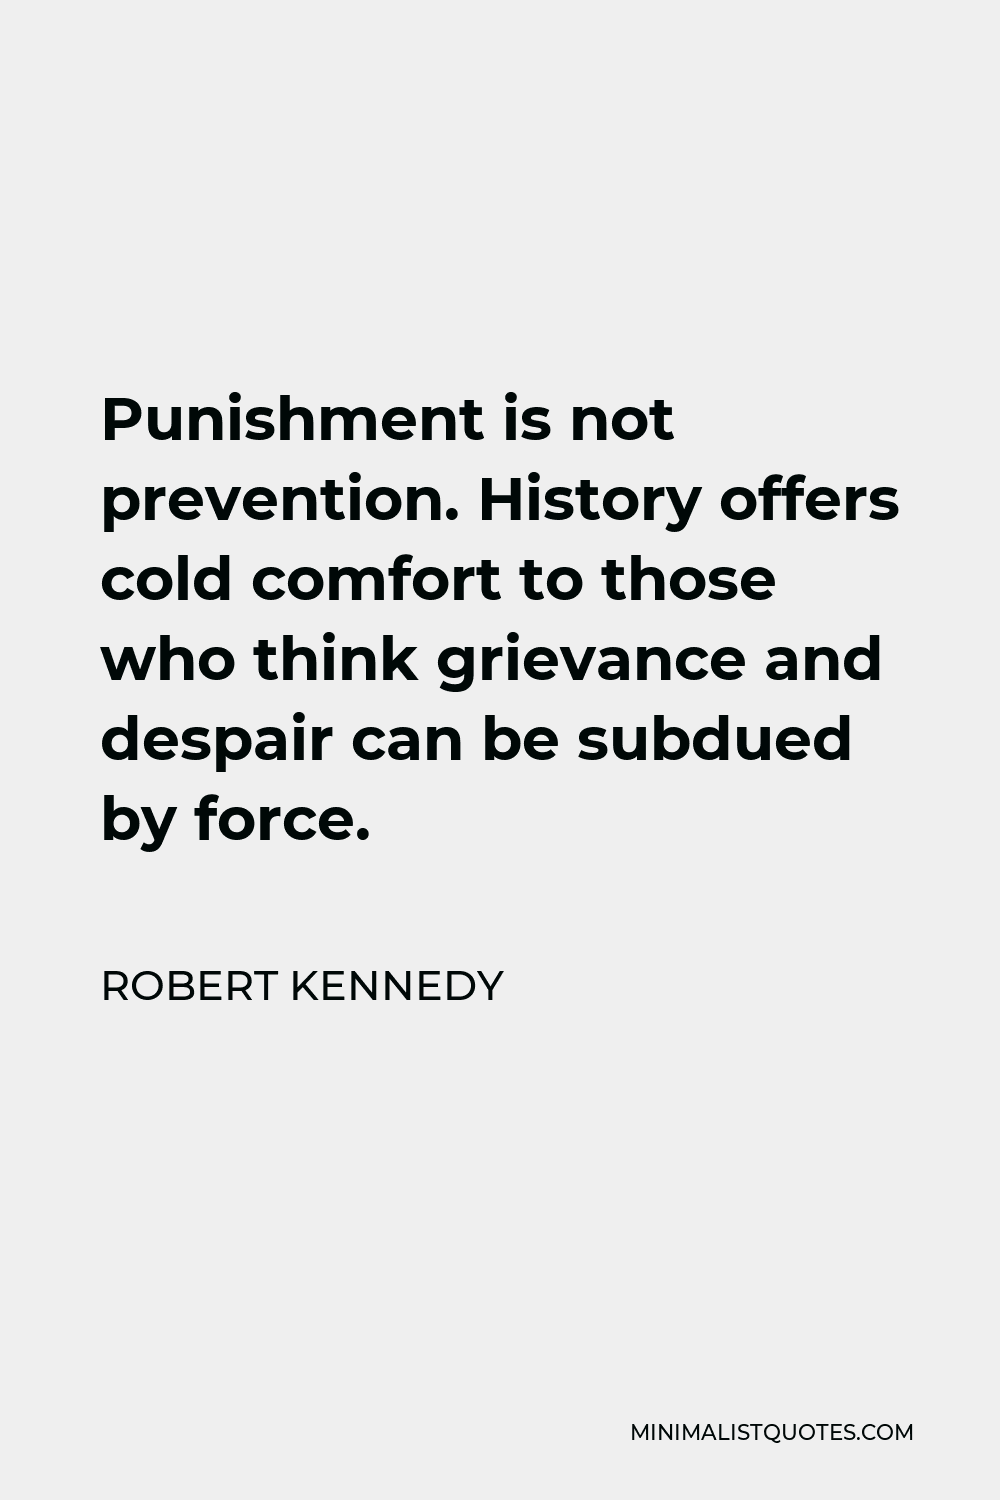 Robert Kennedy Quote - Punishment is not prevention. History offers cold comfort to those who think grievance and despair can be subdued by force.